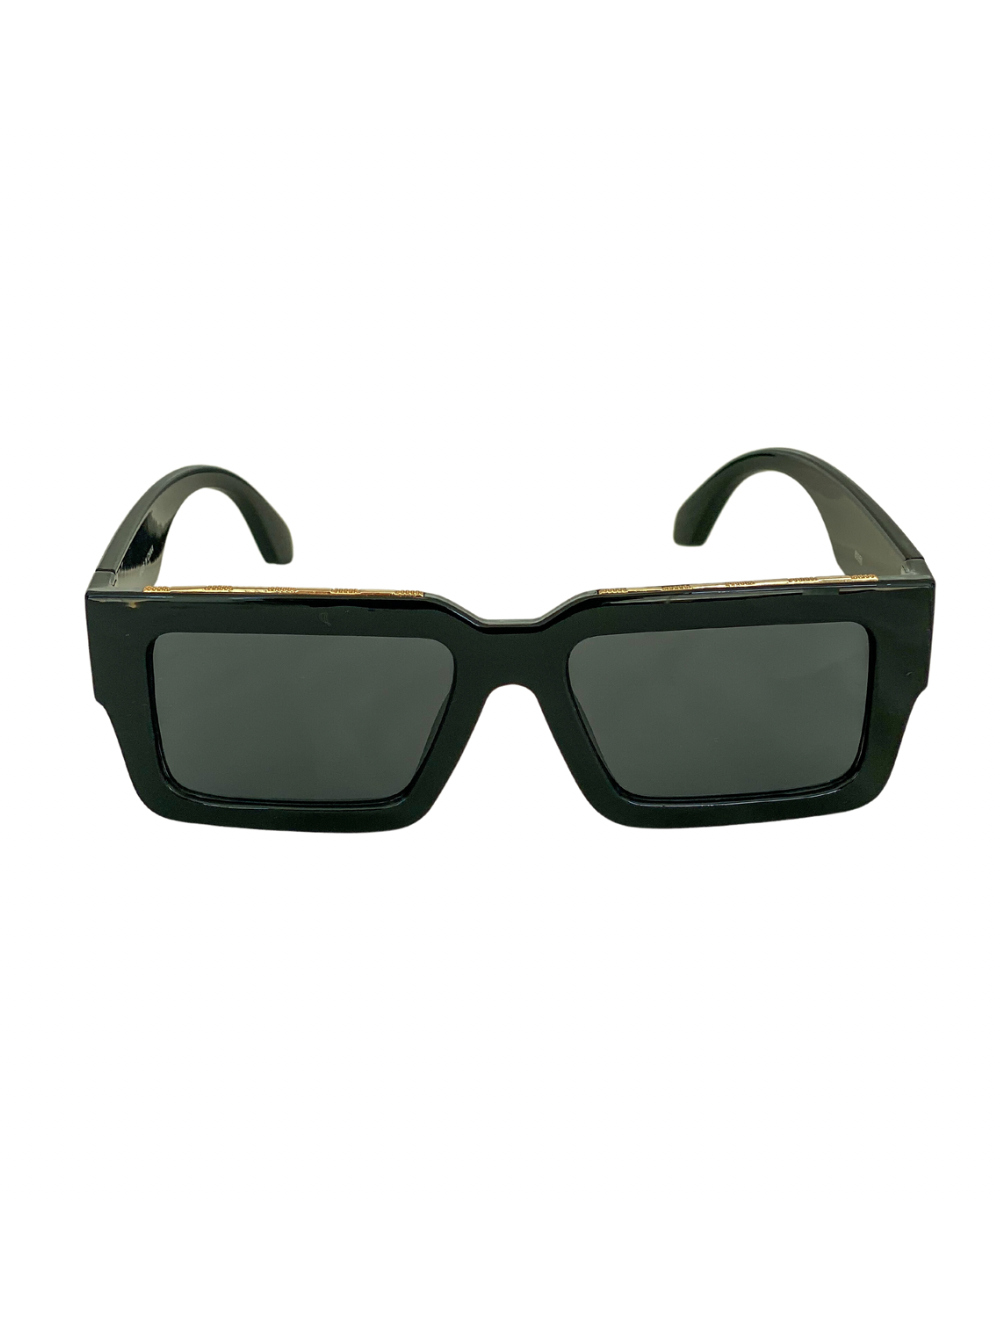 Black and Gold Made to Sun Sunglasses